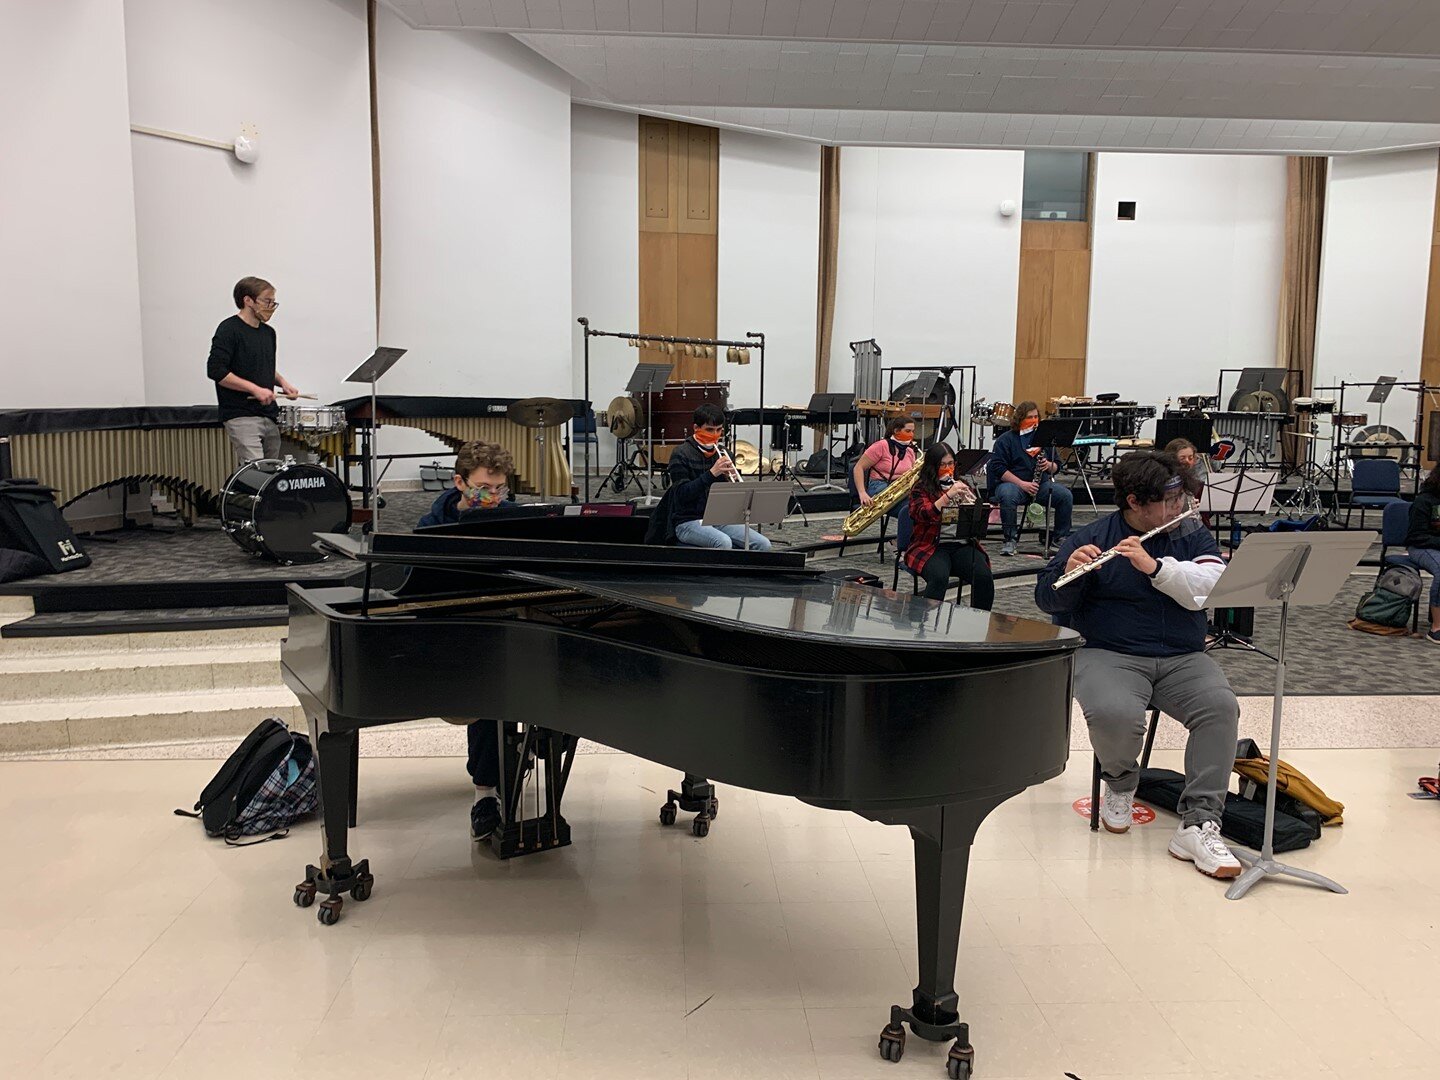 The Hindsley Symphonic Band started new music this week for their second cycle! Pictured is a chamber group led by master's student Tim Loman is reading &quot;Sharp 9&quot; by Omar Thomas. These students will work on this blues tune and explore impro